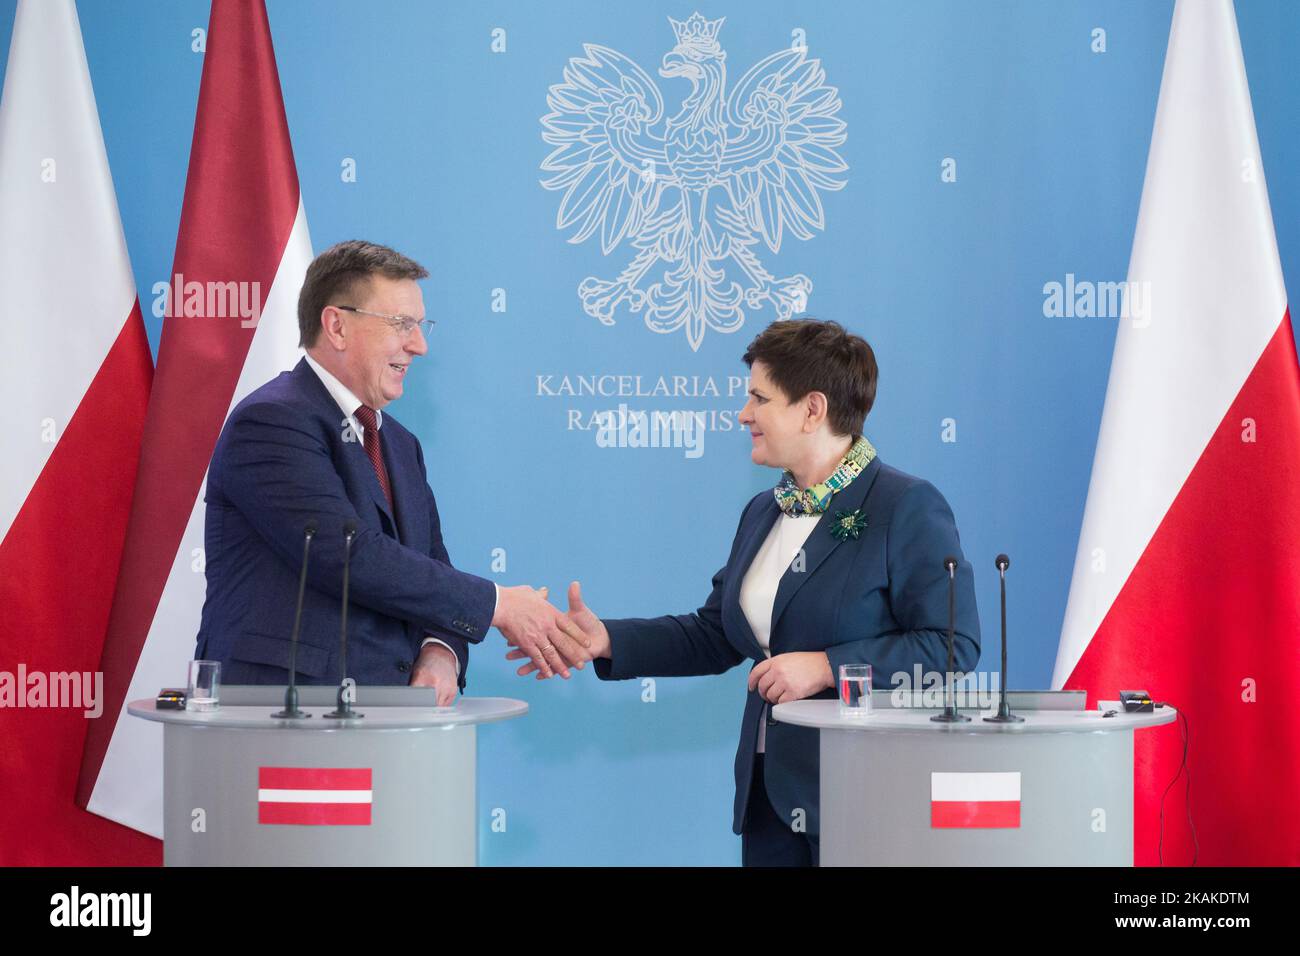 Prime Minister of Poland Beata Szydlo and Prime Minister of Latvia Maris Kucinskis during theÂ press conference at Chancellery of the Prime MinisterÂ in Warsaw, Poland on 26 January 2017 (Photo by Mateusz Wlodarczyk/NurPhoto) *** Please Use Credit from Credit Field *** Stock Photo